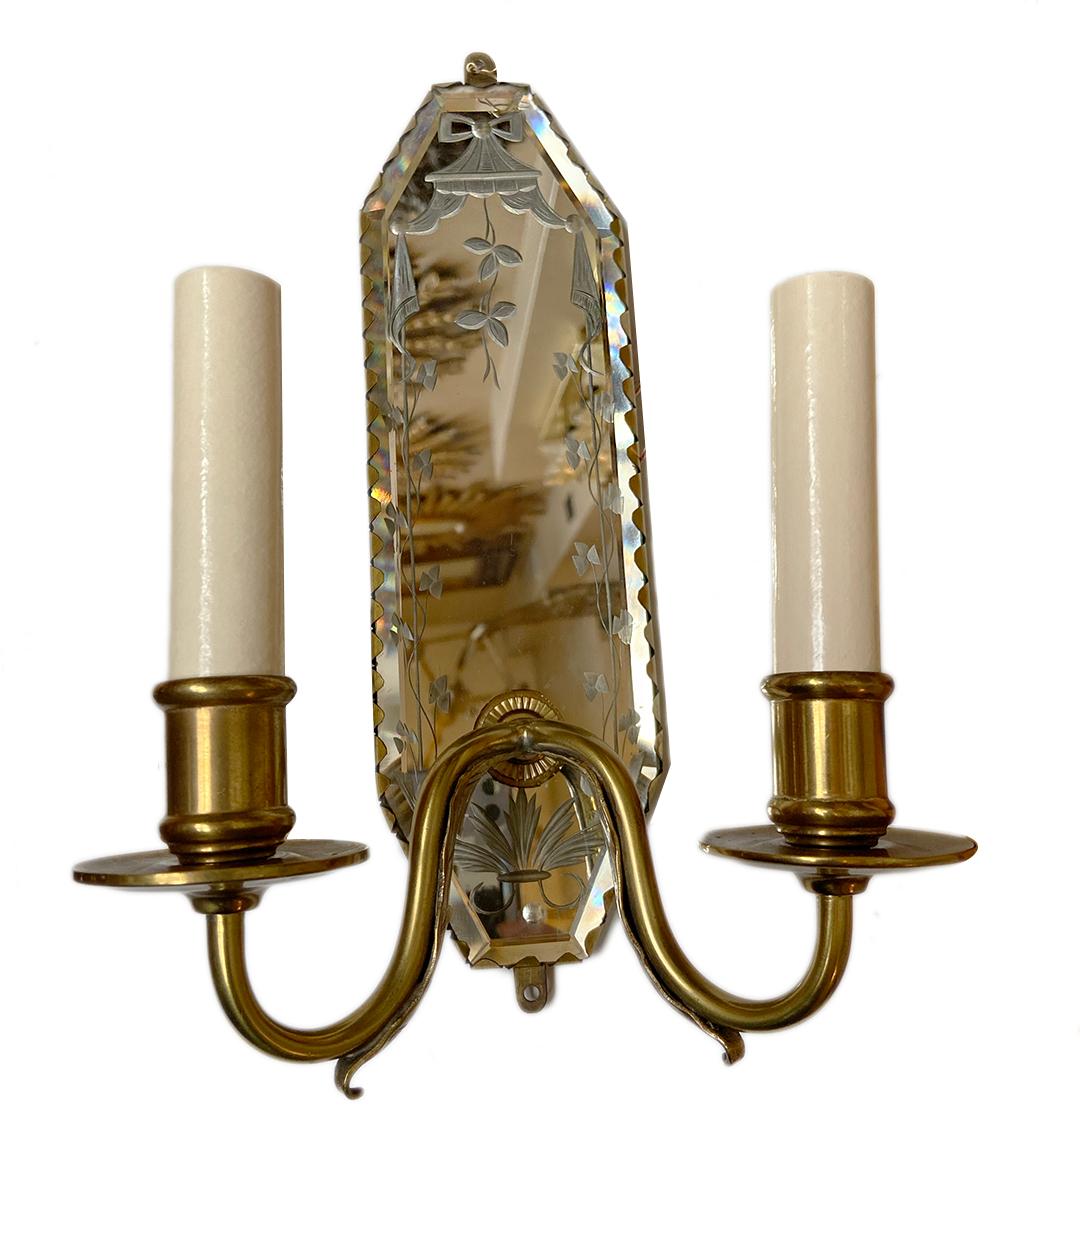 Pair of French circa 1920s two-arm gilt bronze etched mirror sconces.

Measurements:
Height 11.25